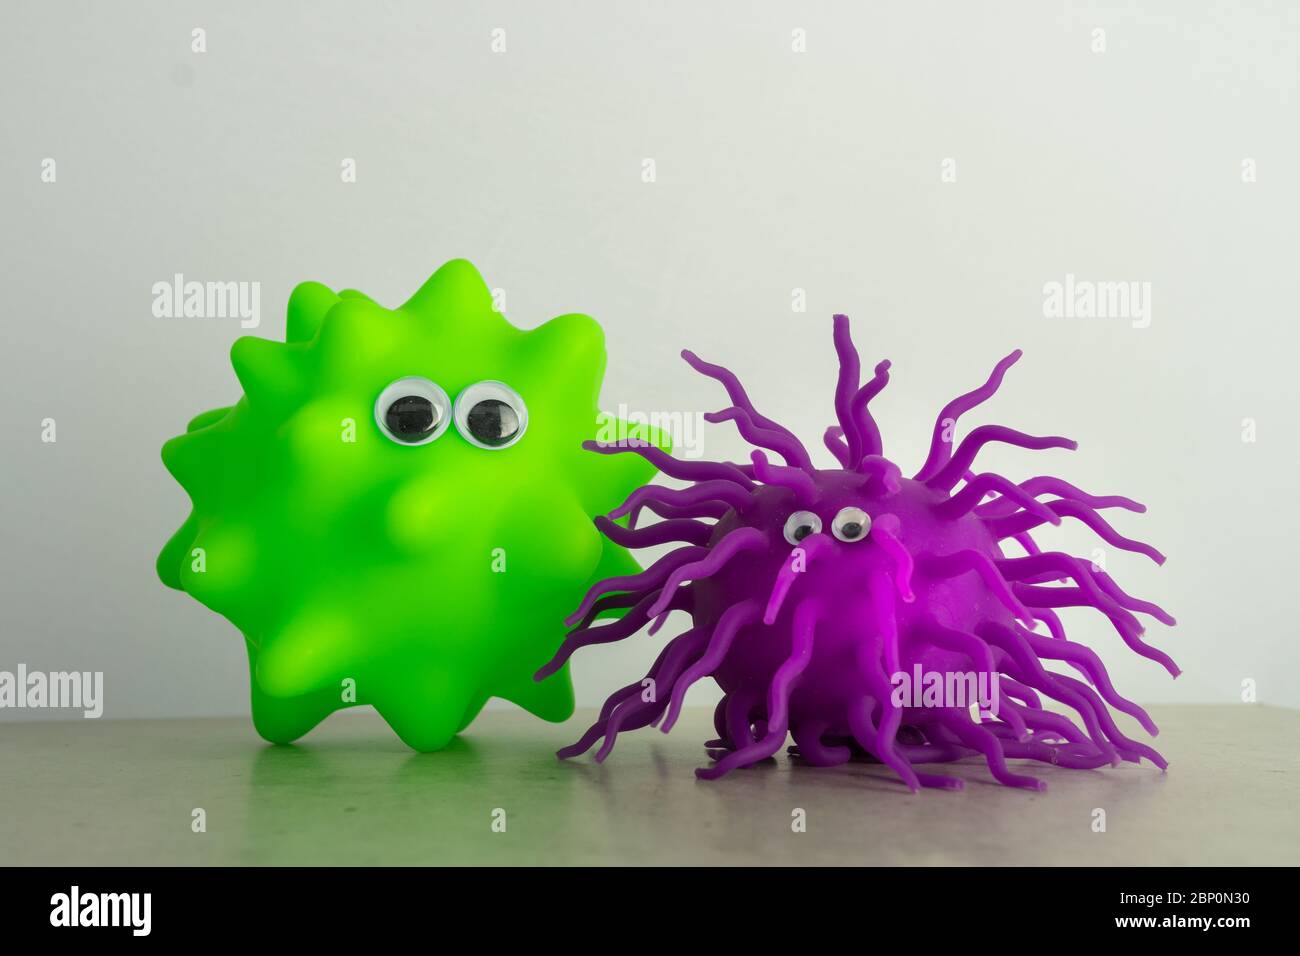 A green toy for dog and a purple gummy ball both with eyes as a representation of virus or bacteria Stock Photo